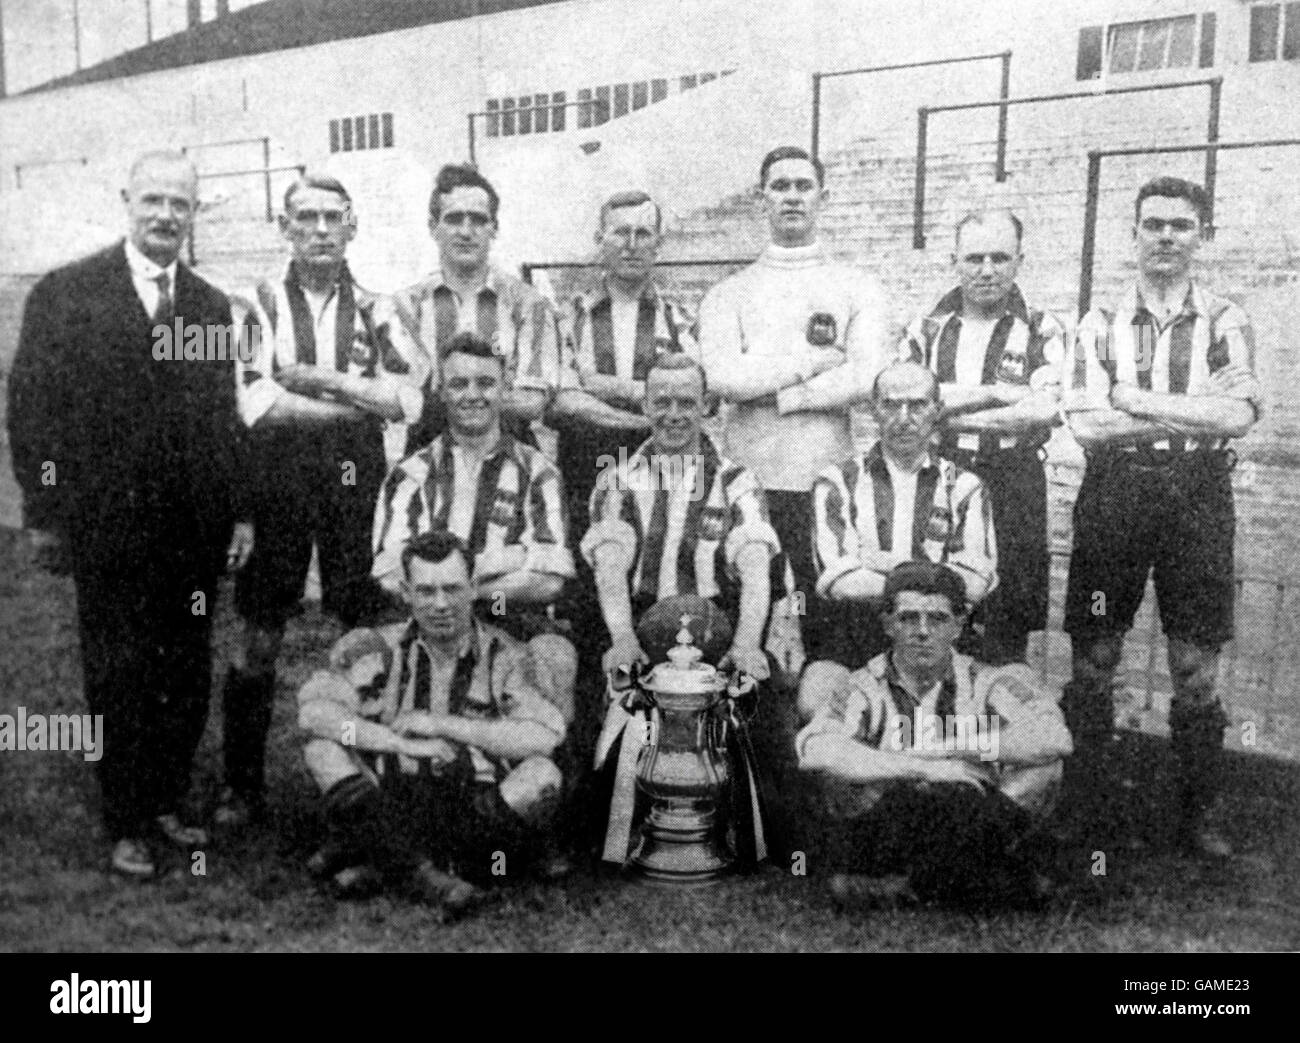 Sheffield United, FA Cup winners 1924-25: (back row, l-r) secretary-manager John Nicholson, Harry Pantling, Seth King, Bill Cook, Charles Sutcliffe, Ernest Milton, George Green (middle row, l-r) Thomas Boyle, Harry Johnson, Billy Gillespie (front row, l-r) Dave Mercer, Fred Tunstall Stock Photo